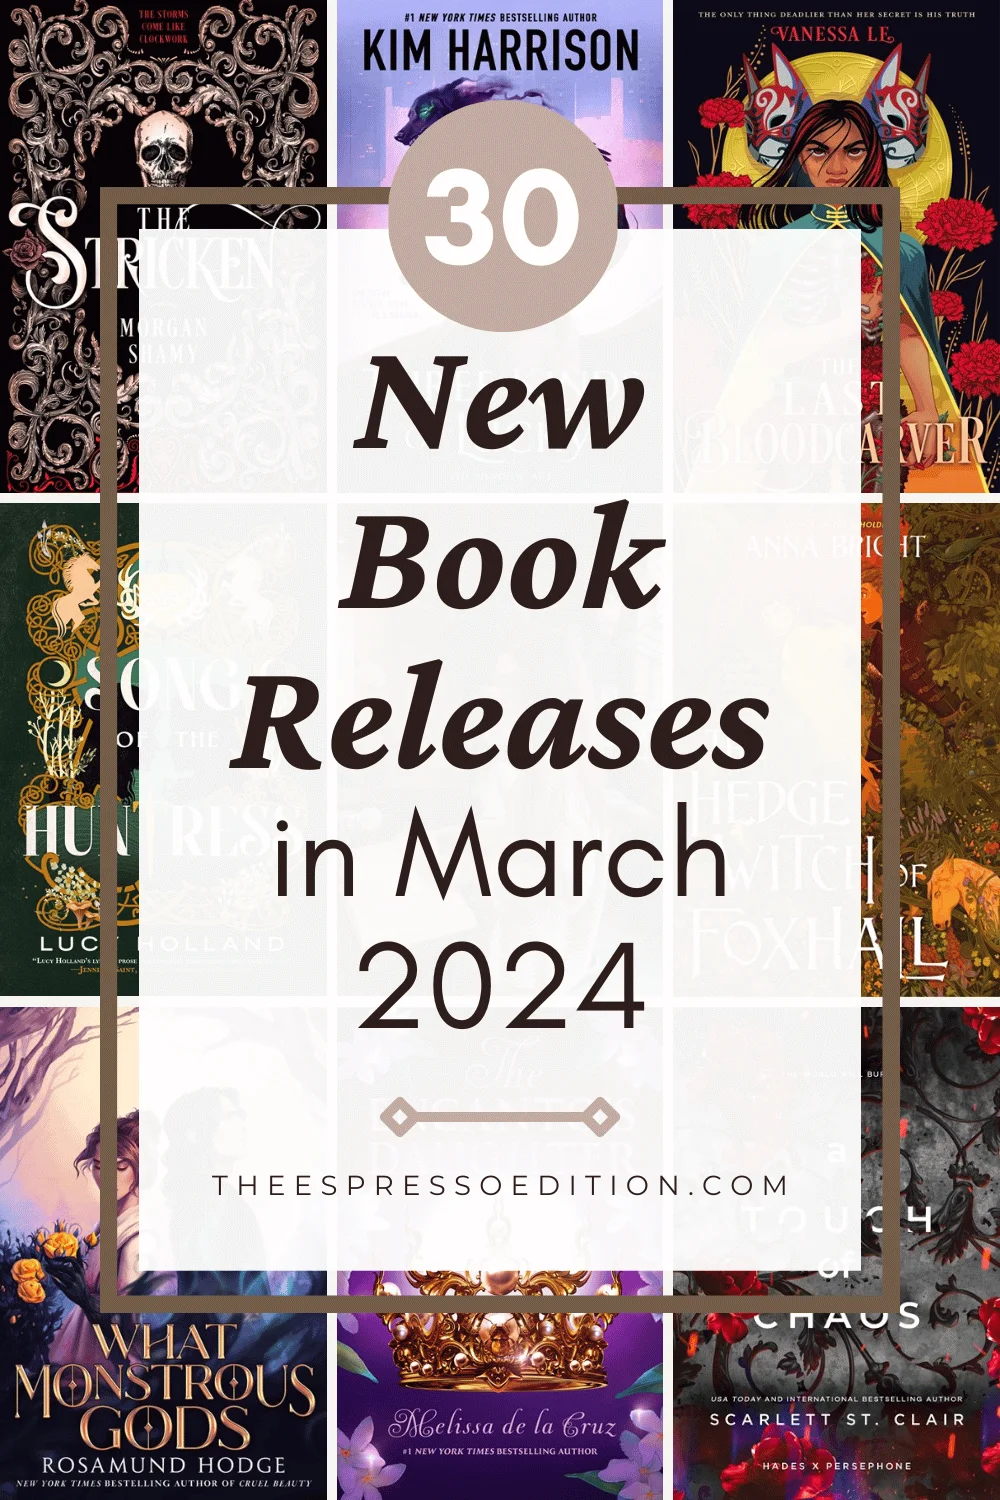 30 New Book Releases in March 2024 by The Espresso Edition cozy bookish blog